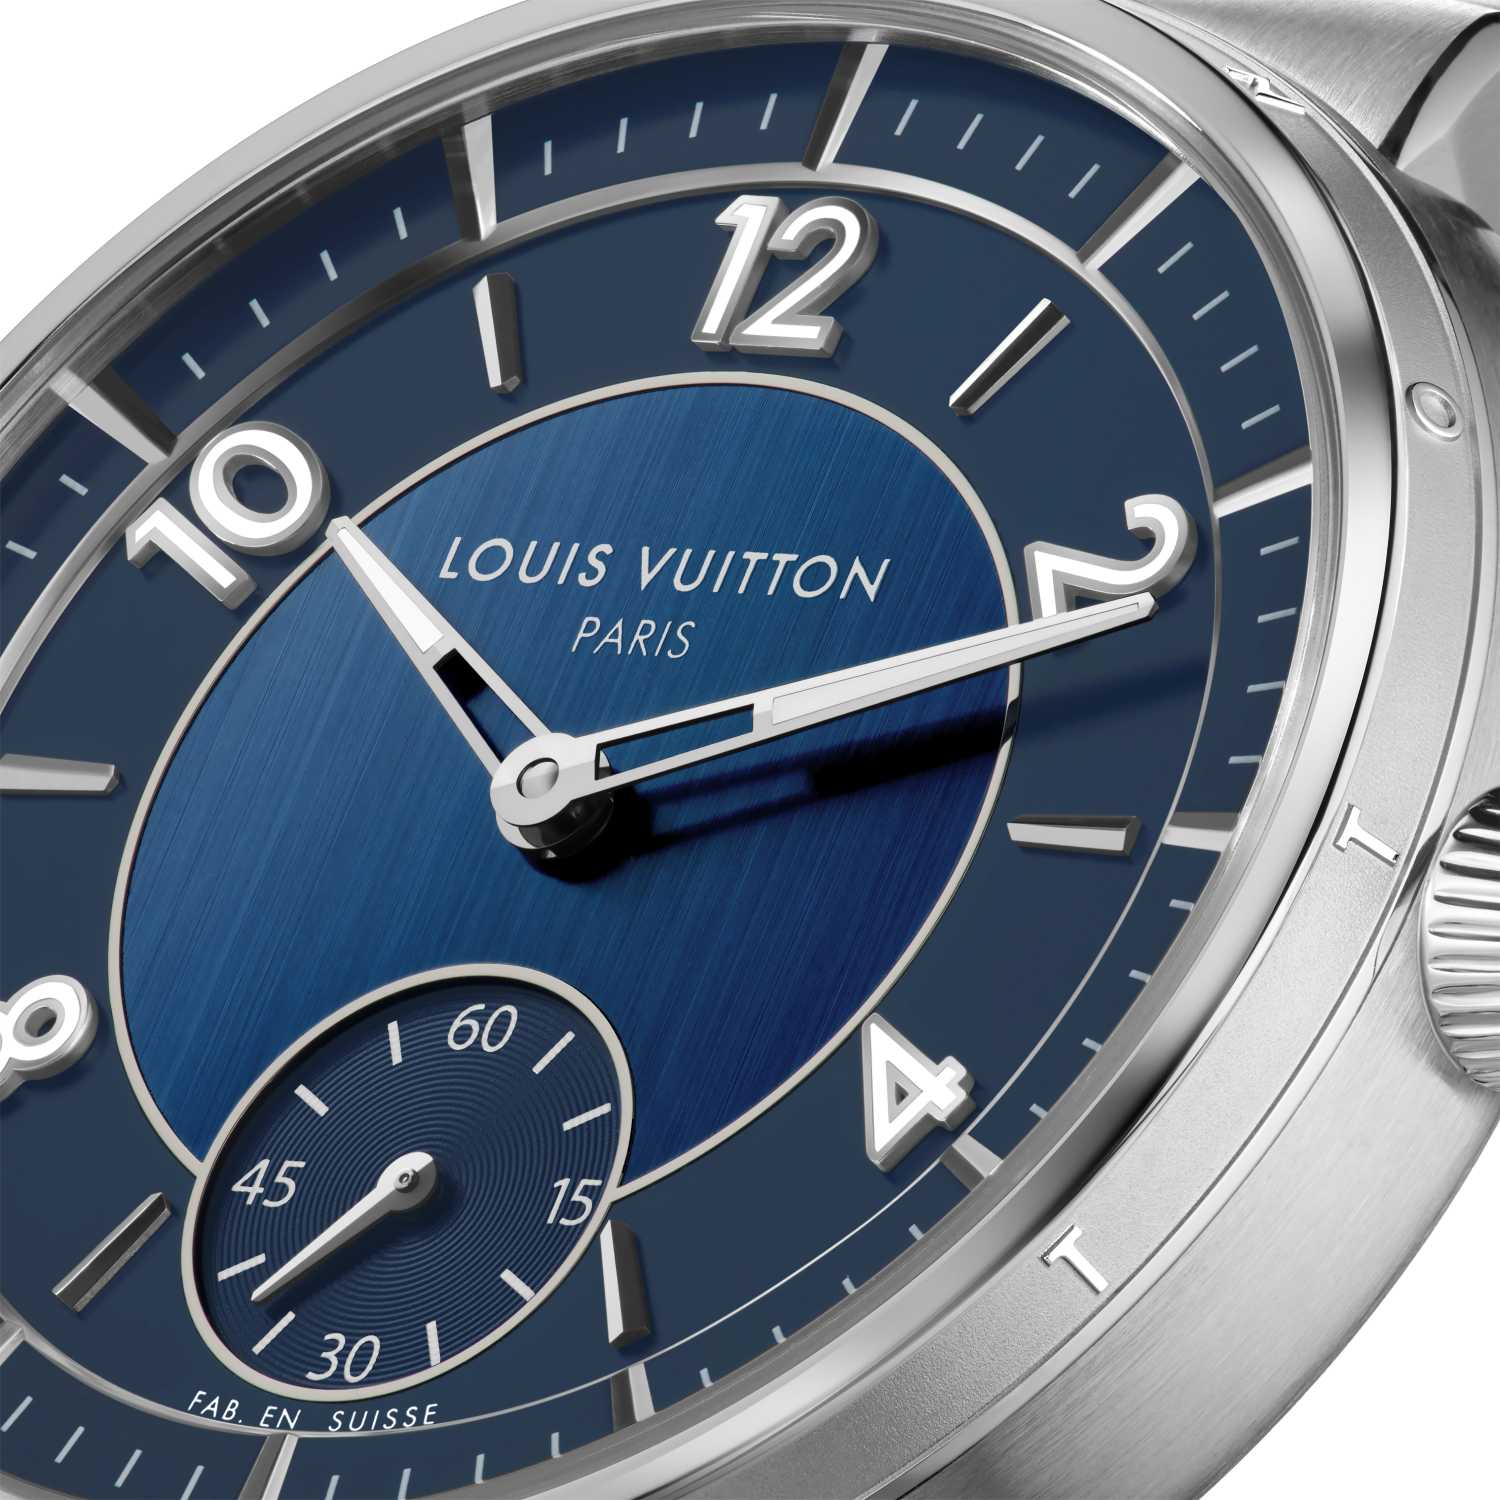 Louis Vuitton's New Watch Is the Star of a Short Film With a Fan